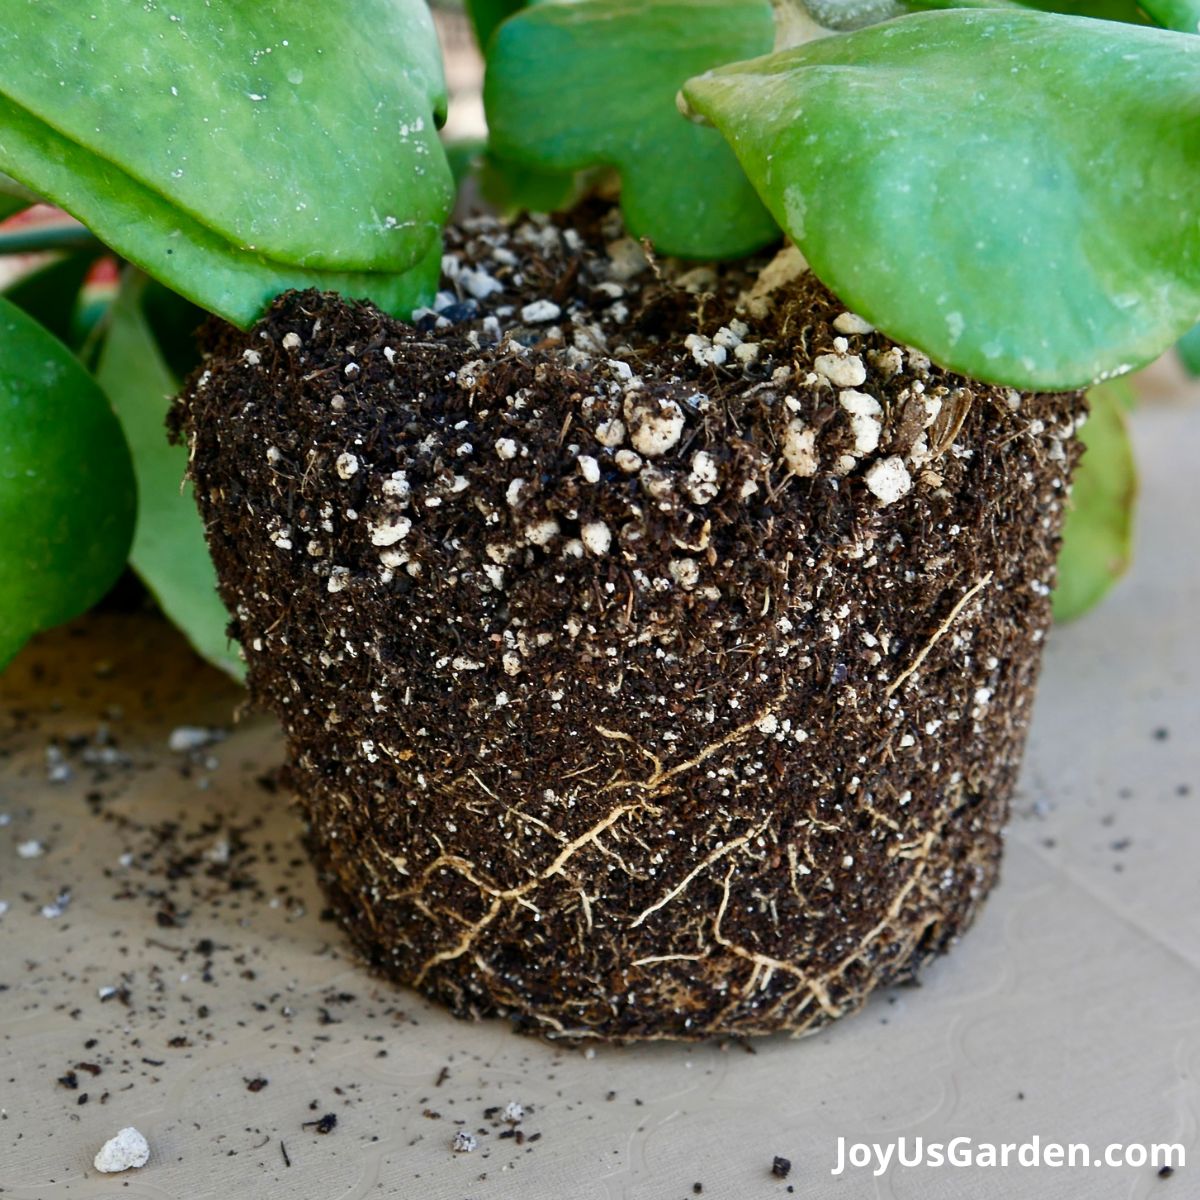 close up of the soil and roots of hoya kerrii, plant is shown outside of pot on sitting on table